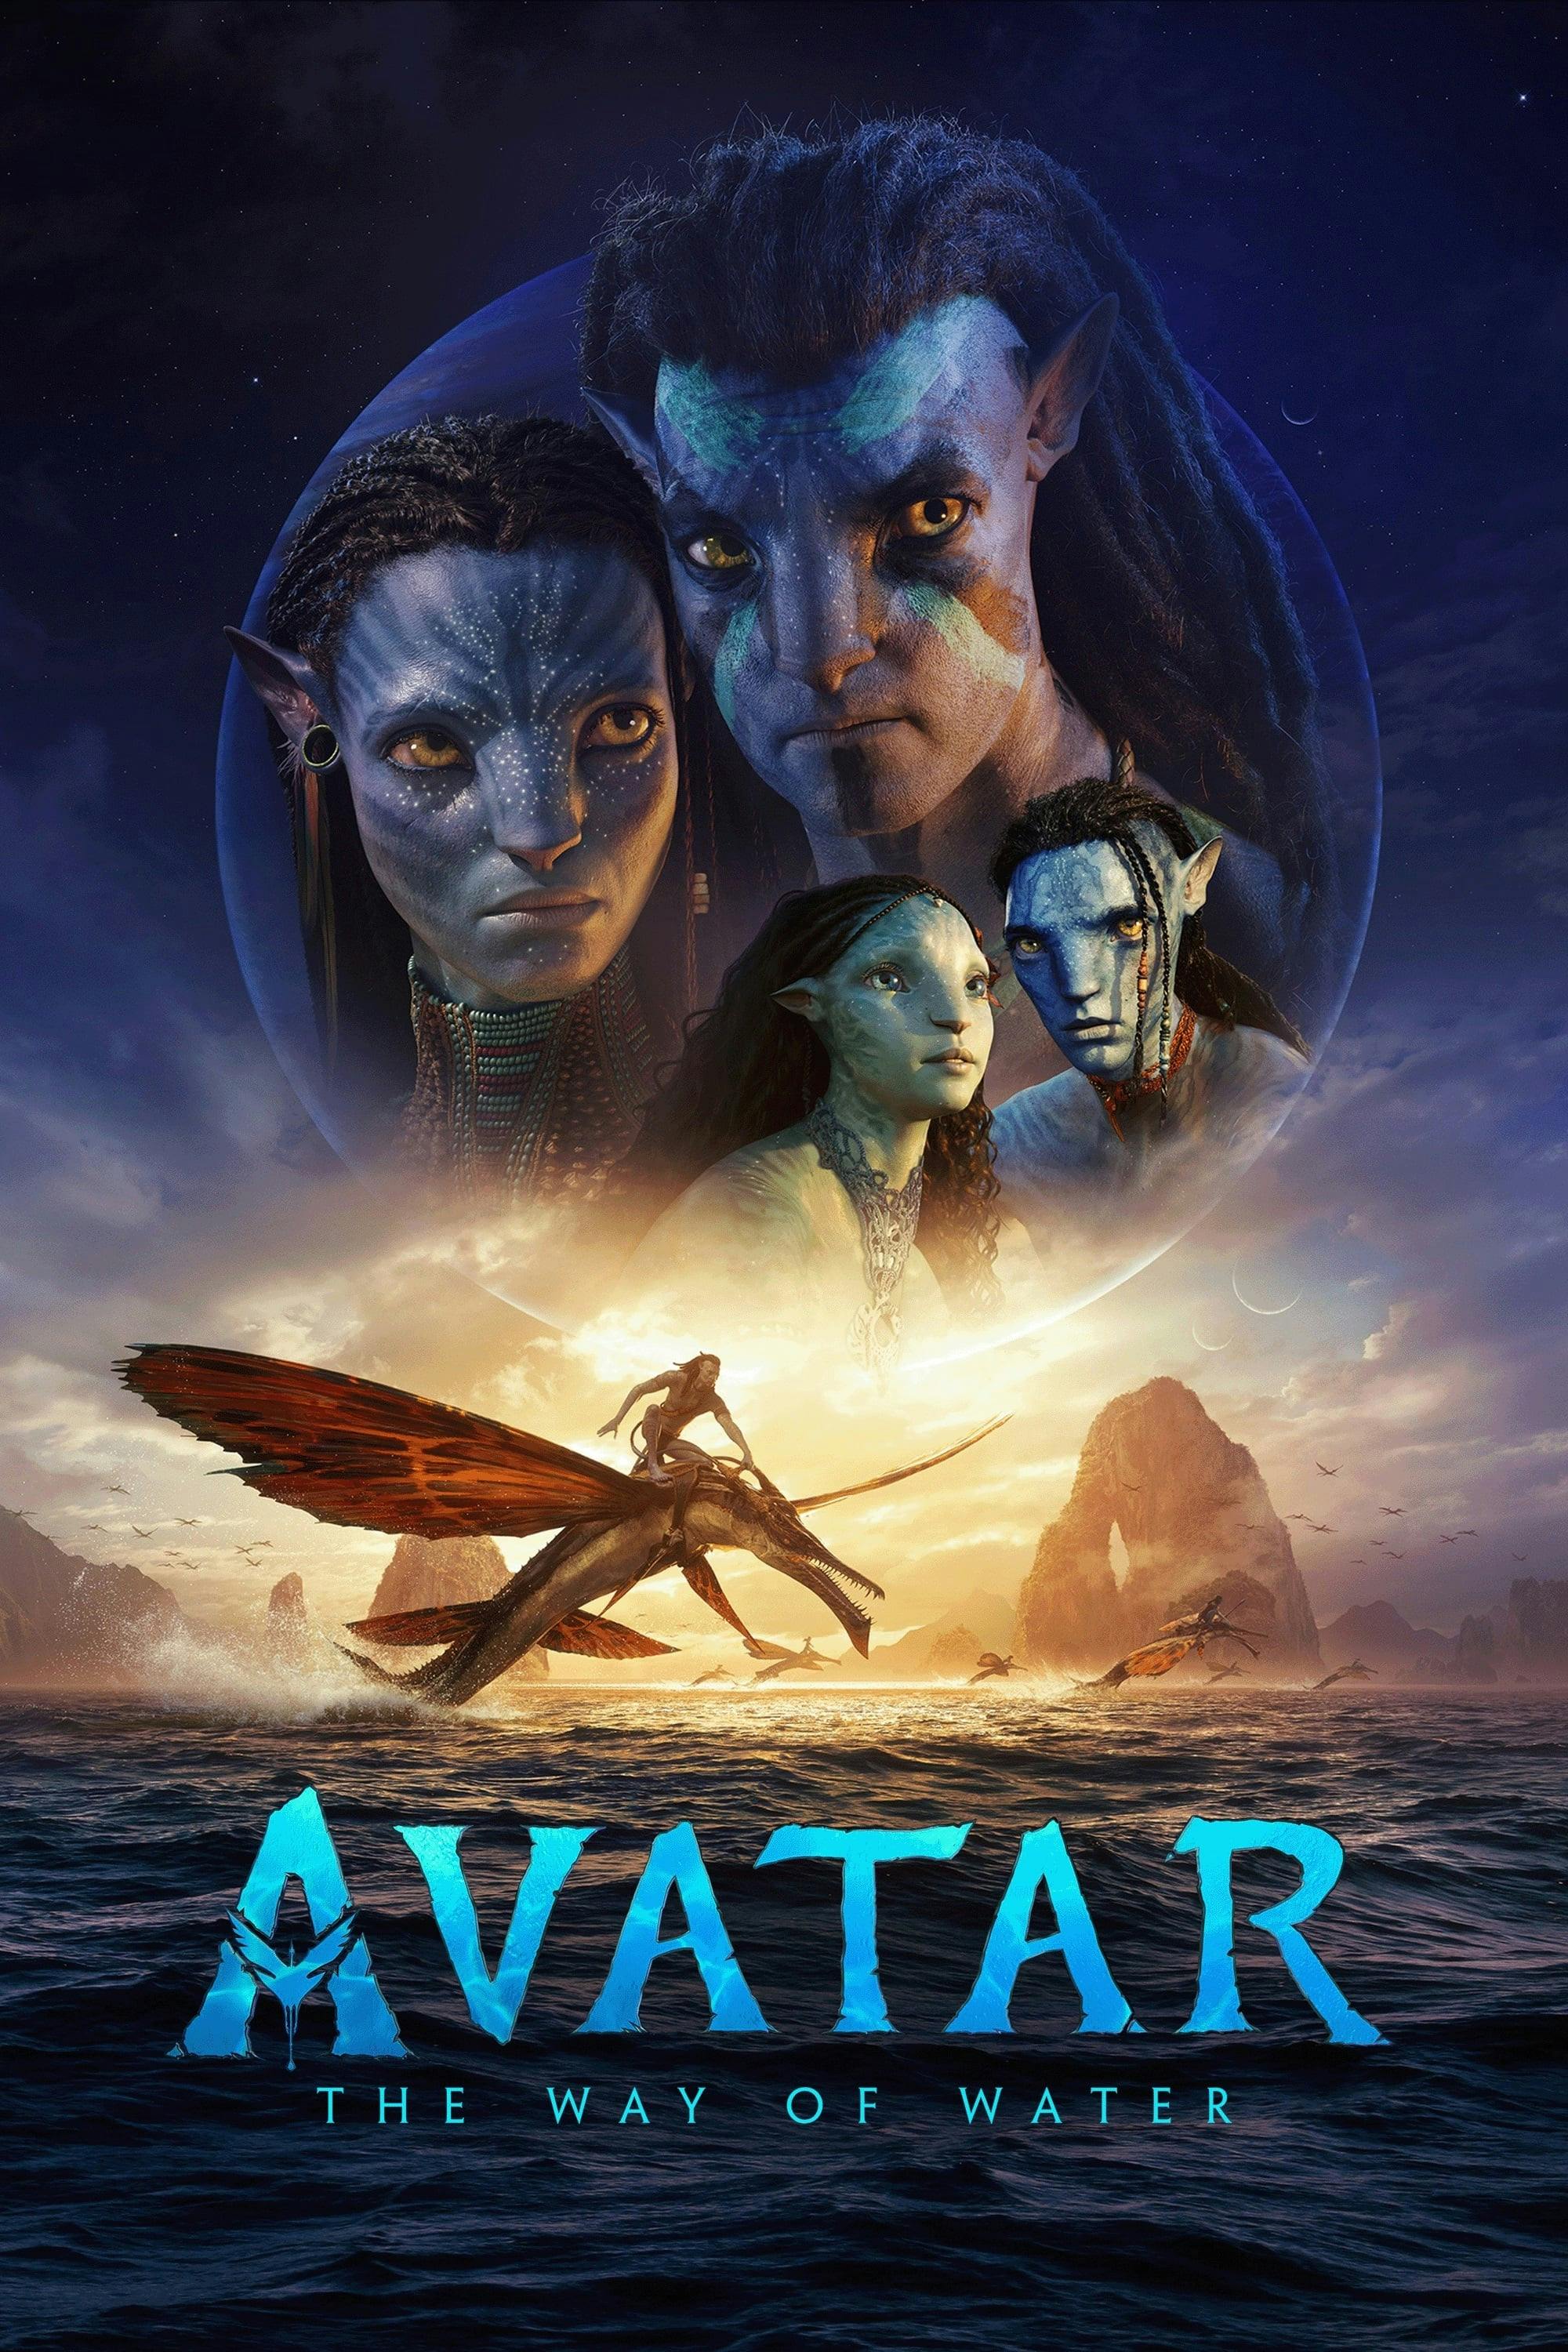 Poster for movie Avatar: The Way of Water